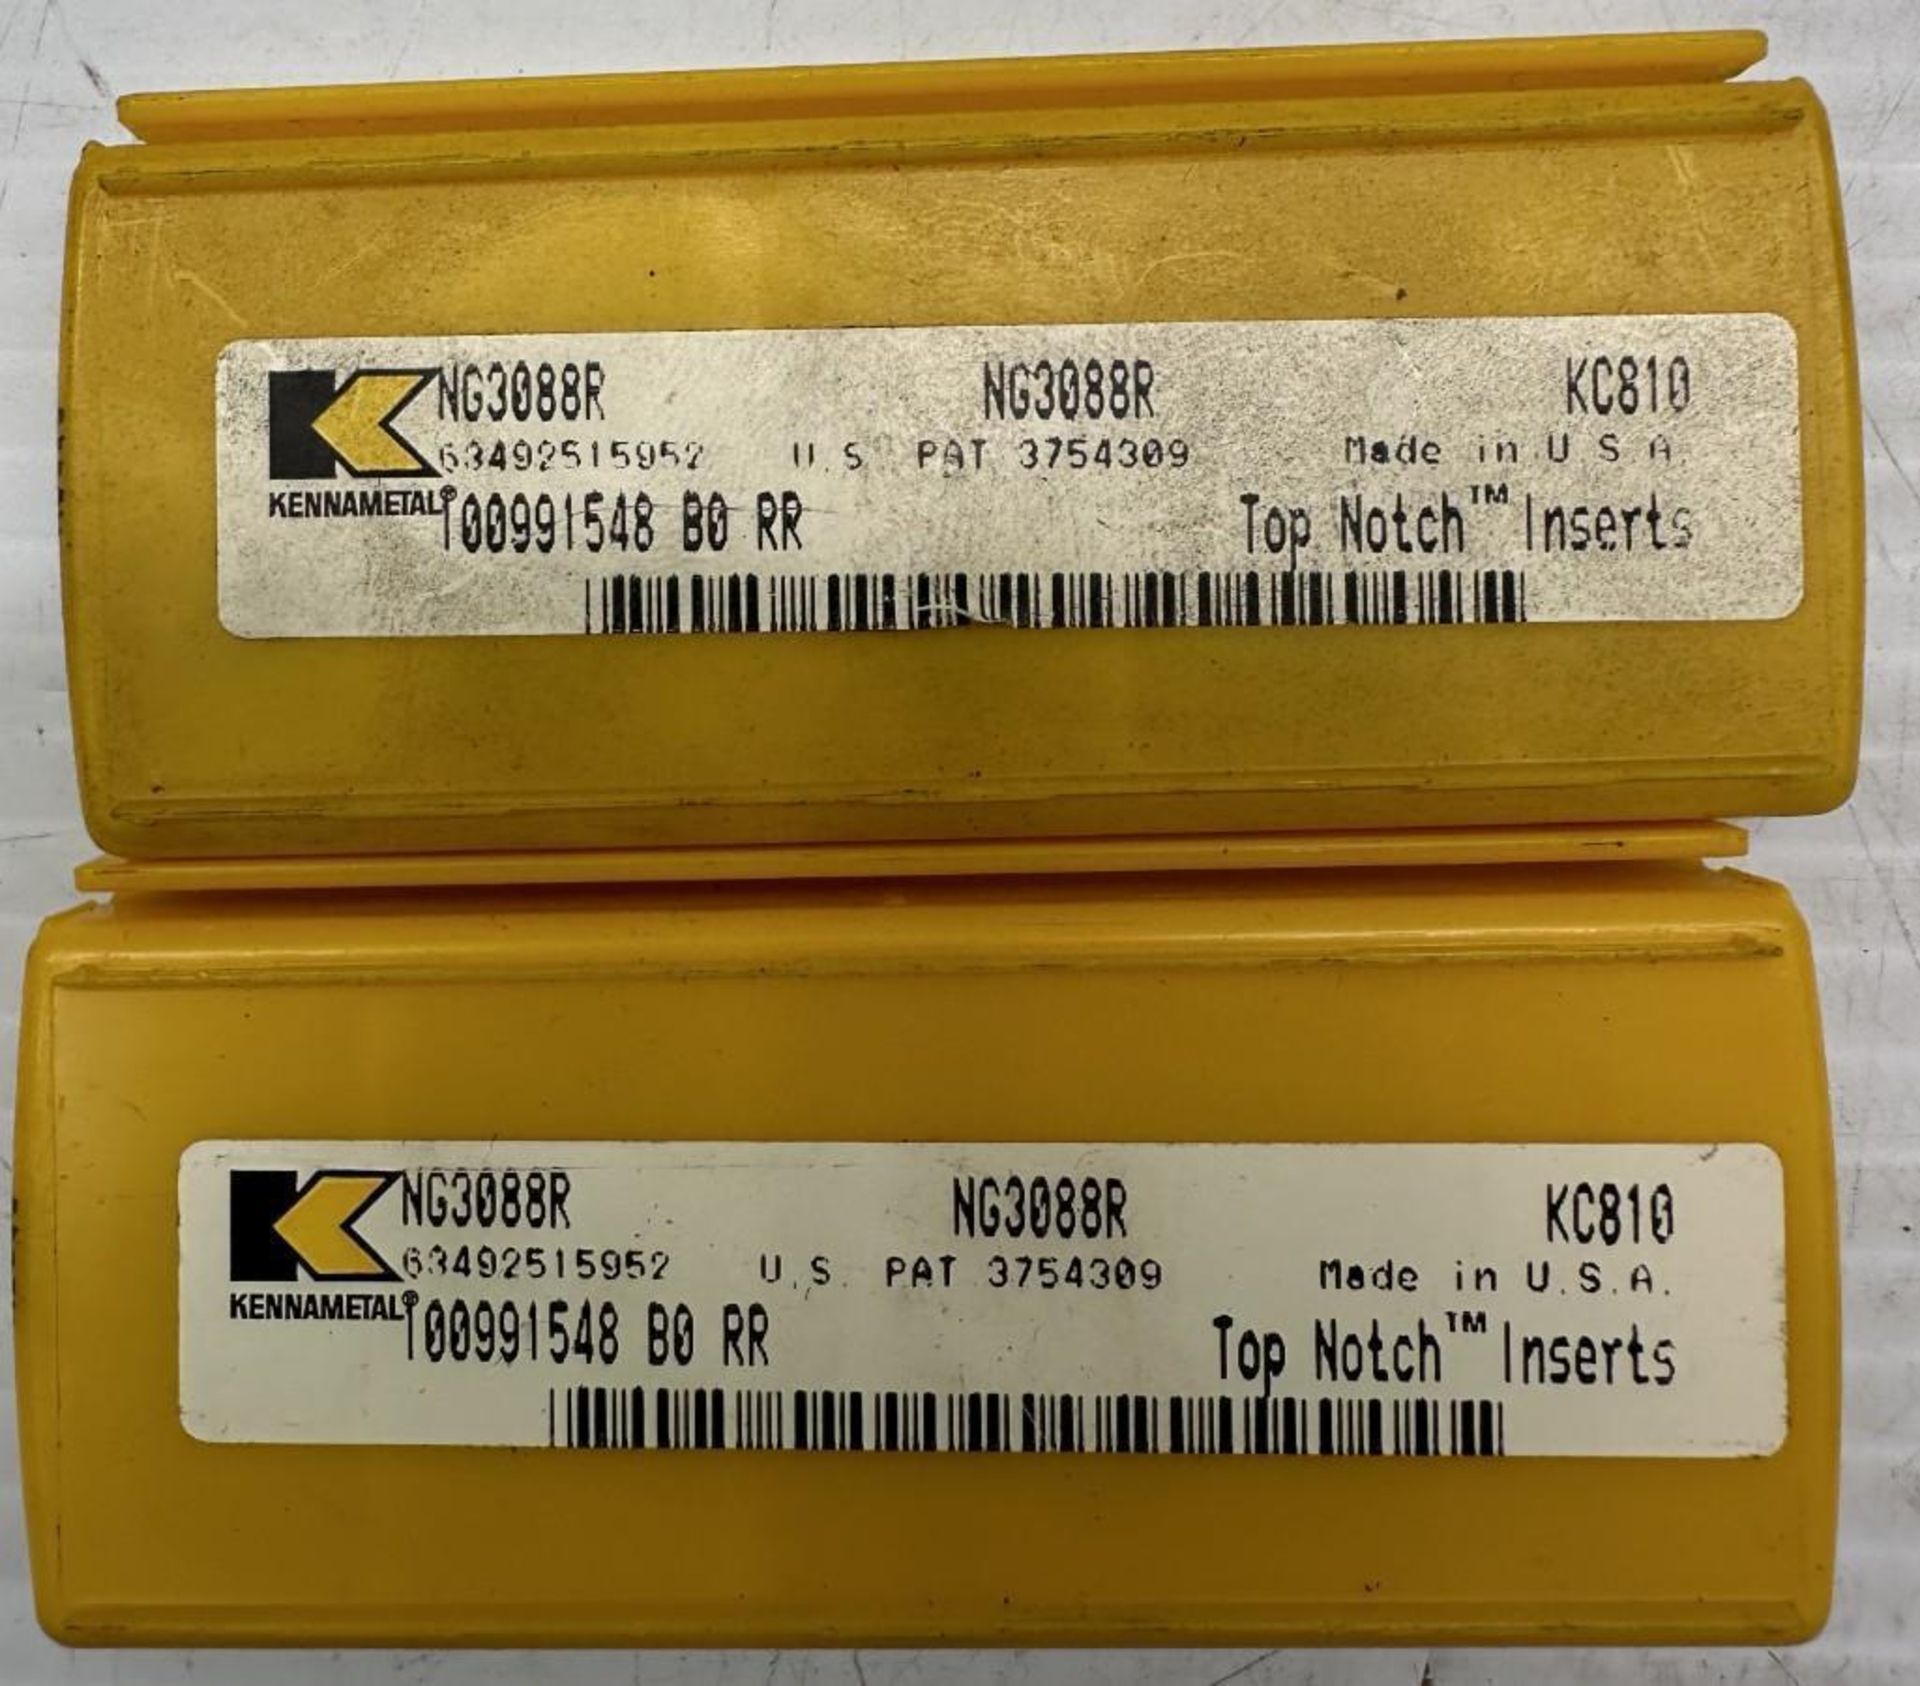 Lot of Kennametal #NG3088R/KC810 Carbide Inserts - Image 3 of 3